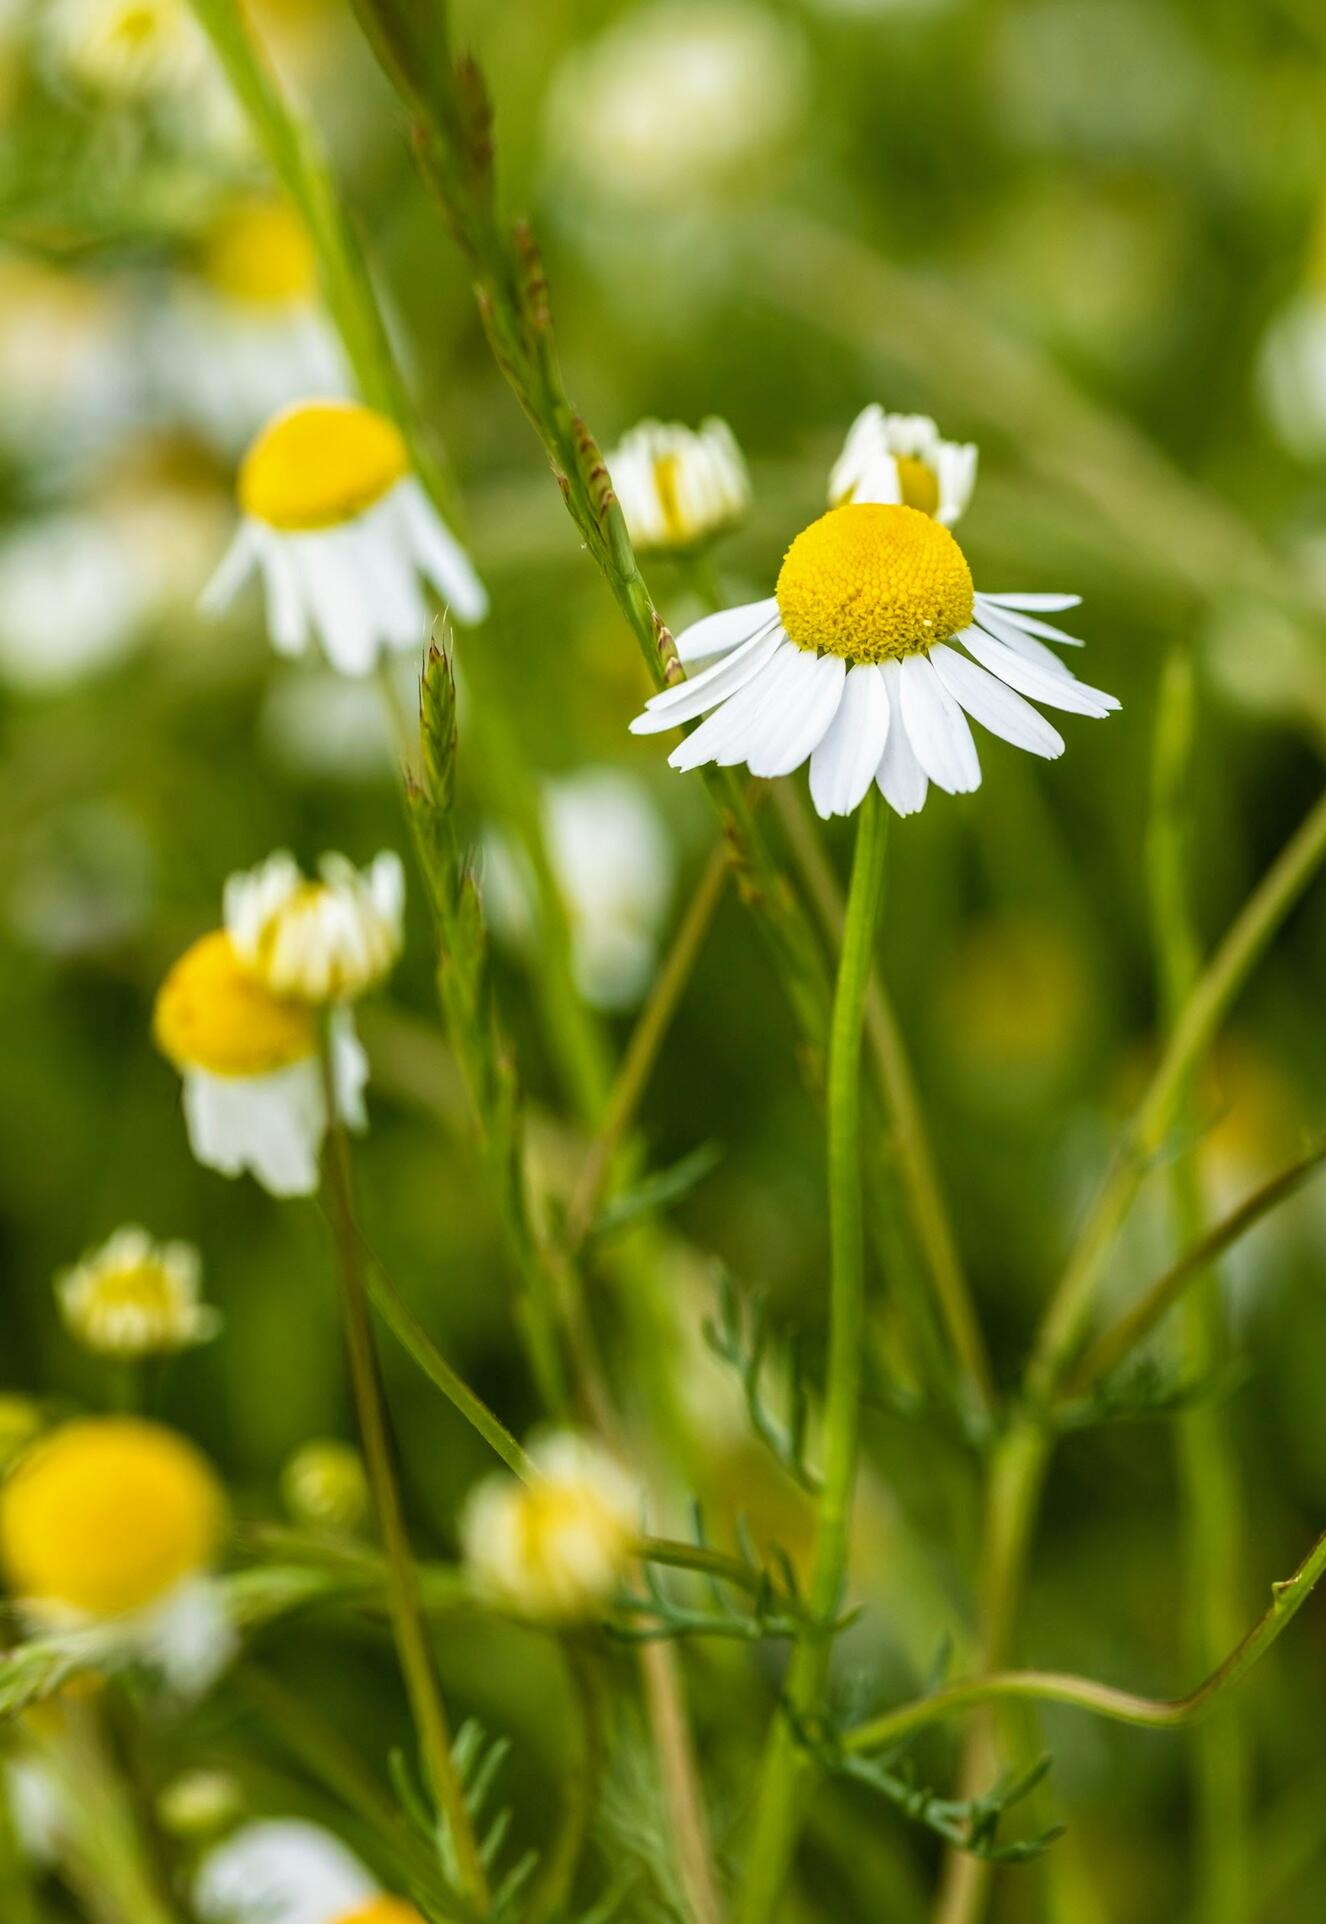 <span class="ezstring-field">kl_chamomile_active-ingredient_field_plant_2019 -1- 367x460</span>